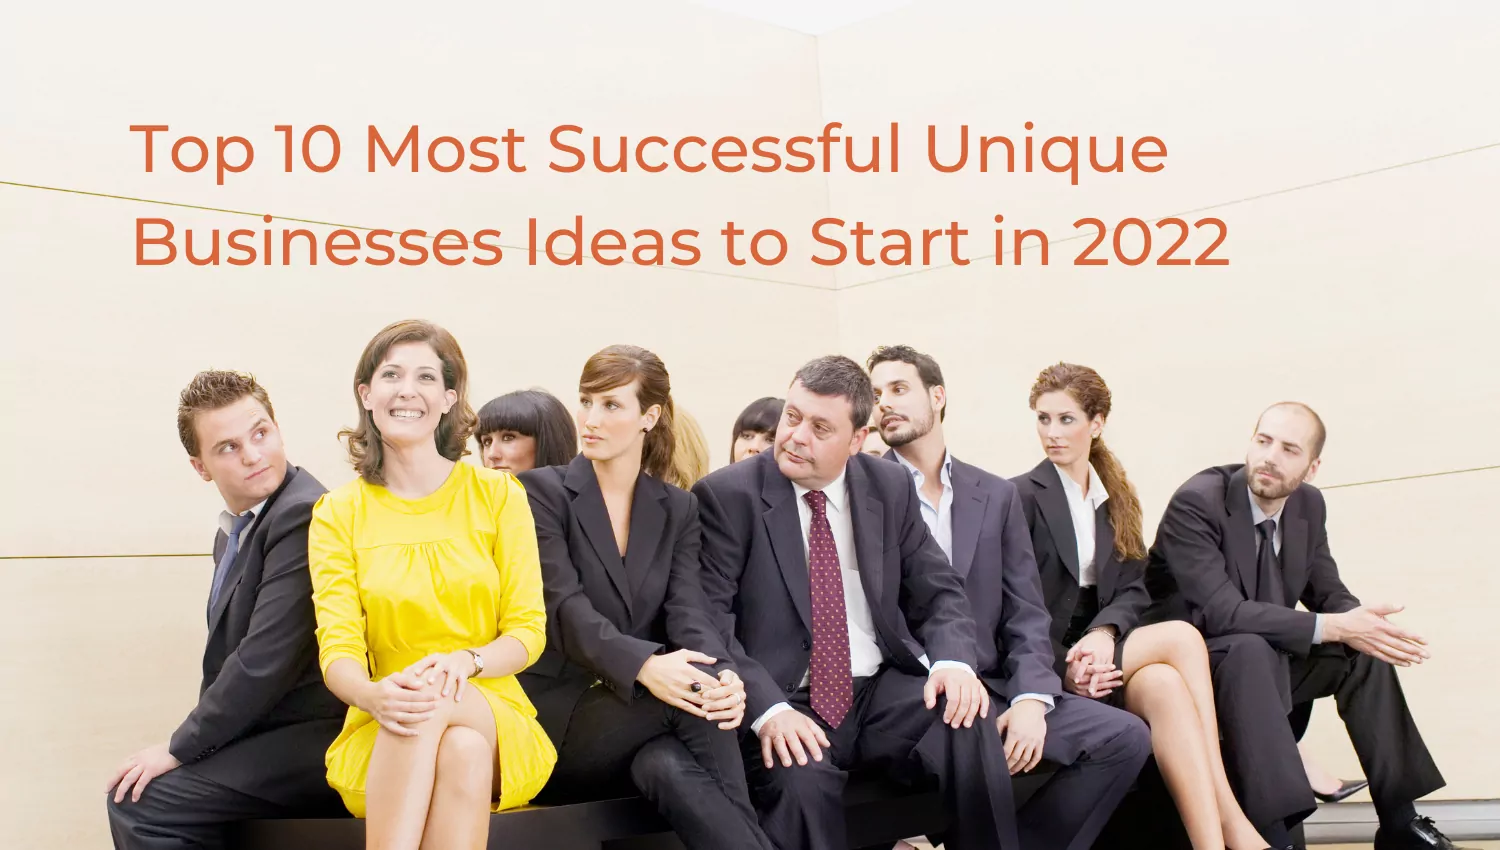 Top 10 Most Successful Unique Businesses Ideas to Start in 2022